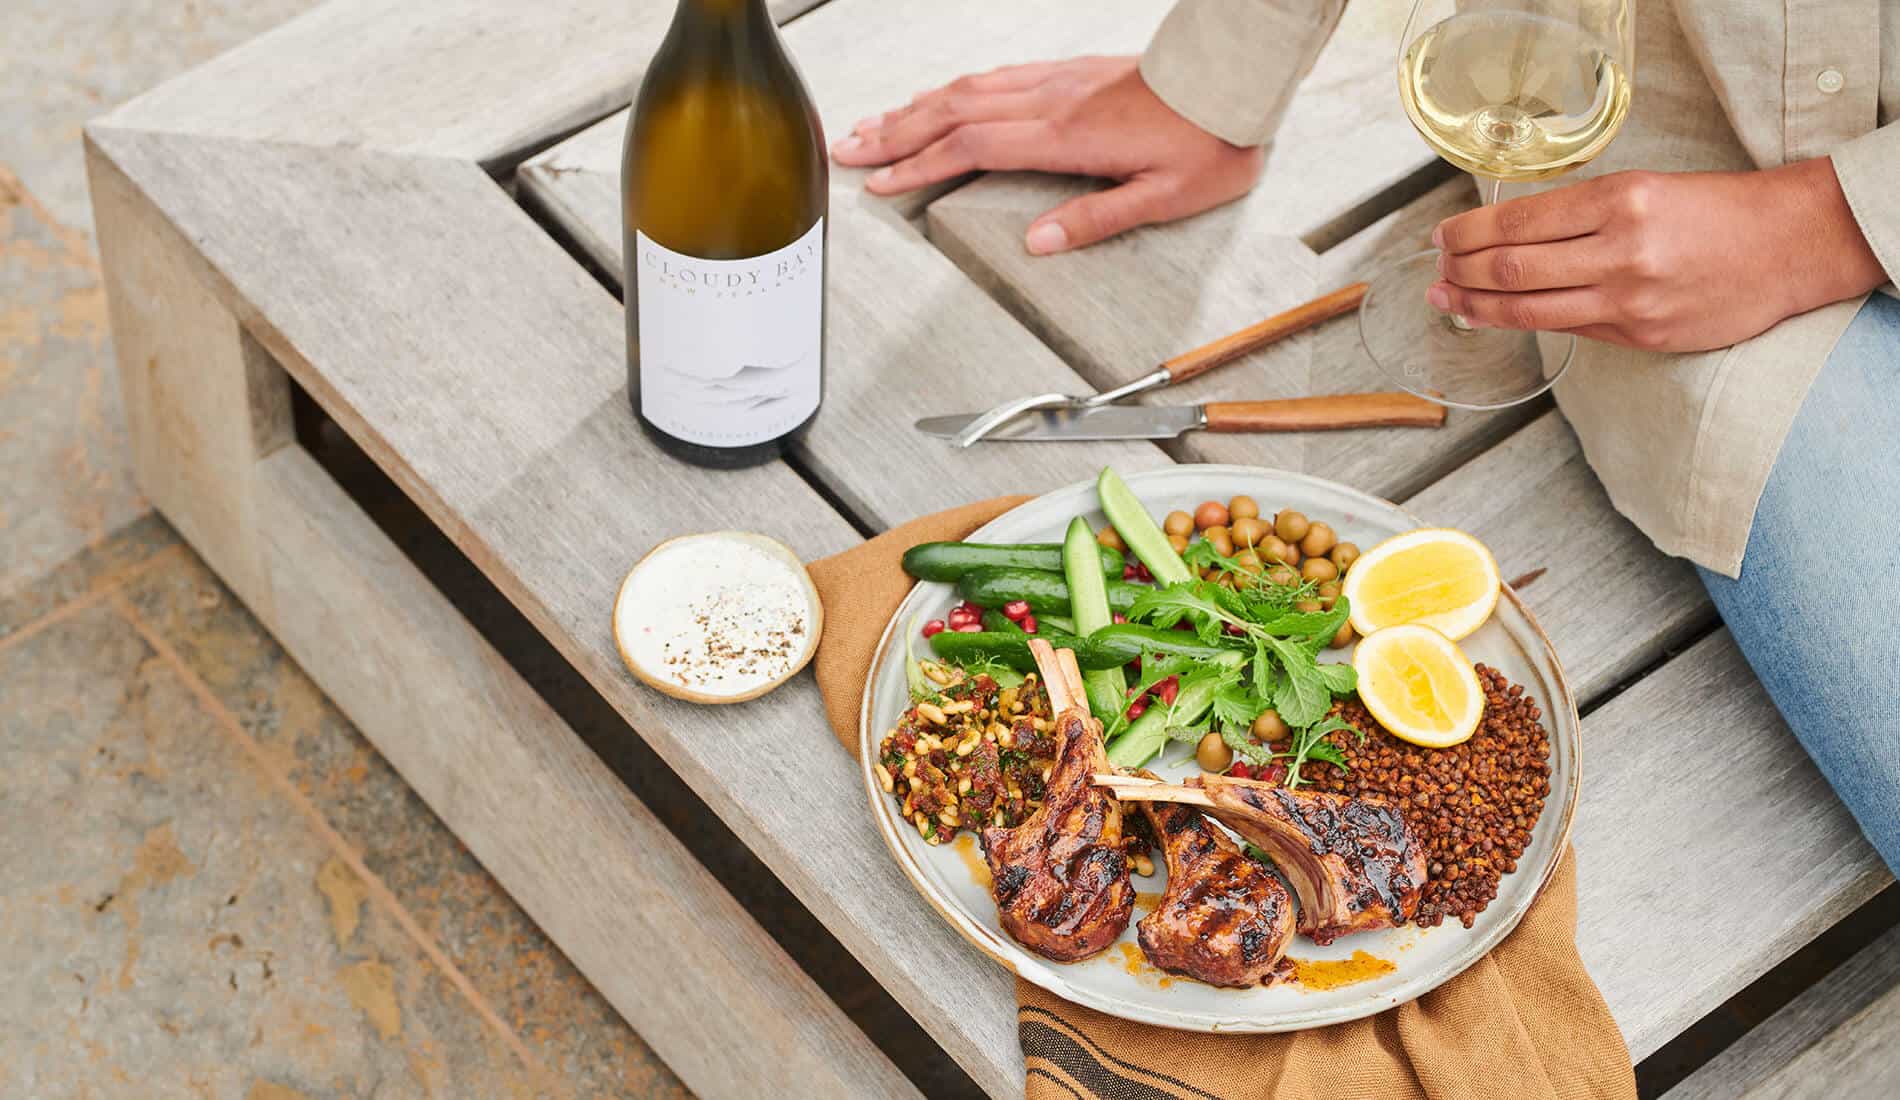 Hand holding glass of white wine beside plate of food and Cloudy Bay Chardonnay bottle